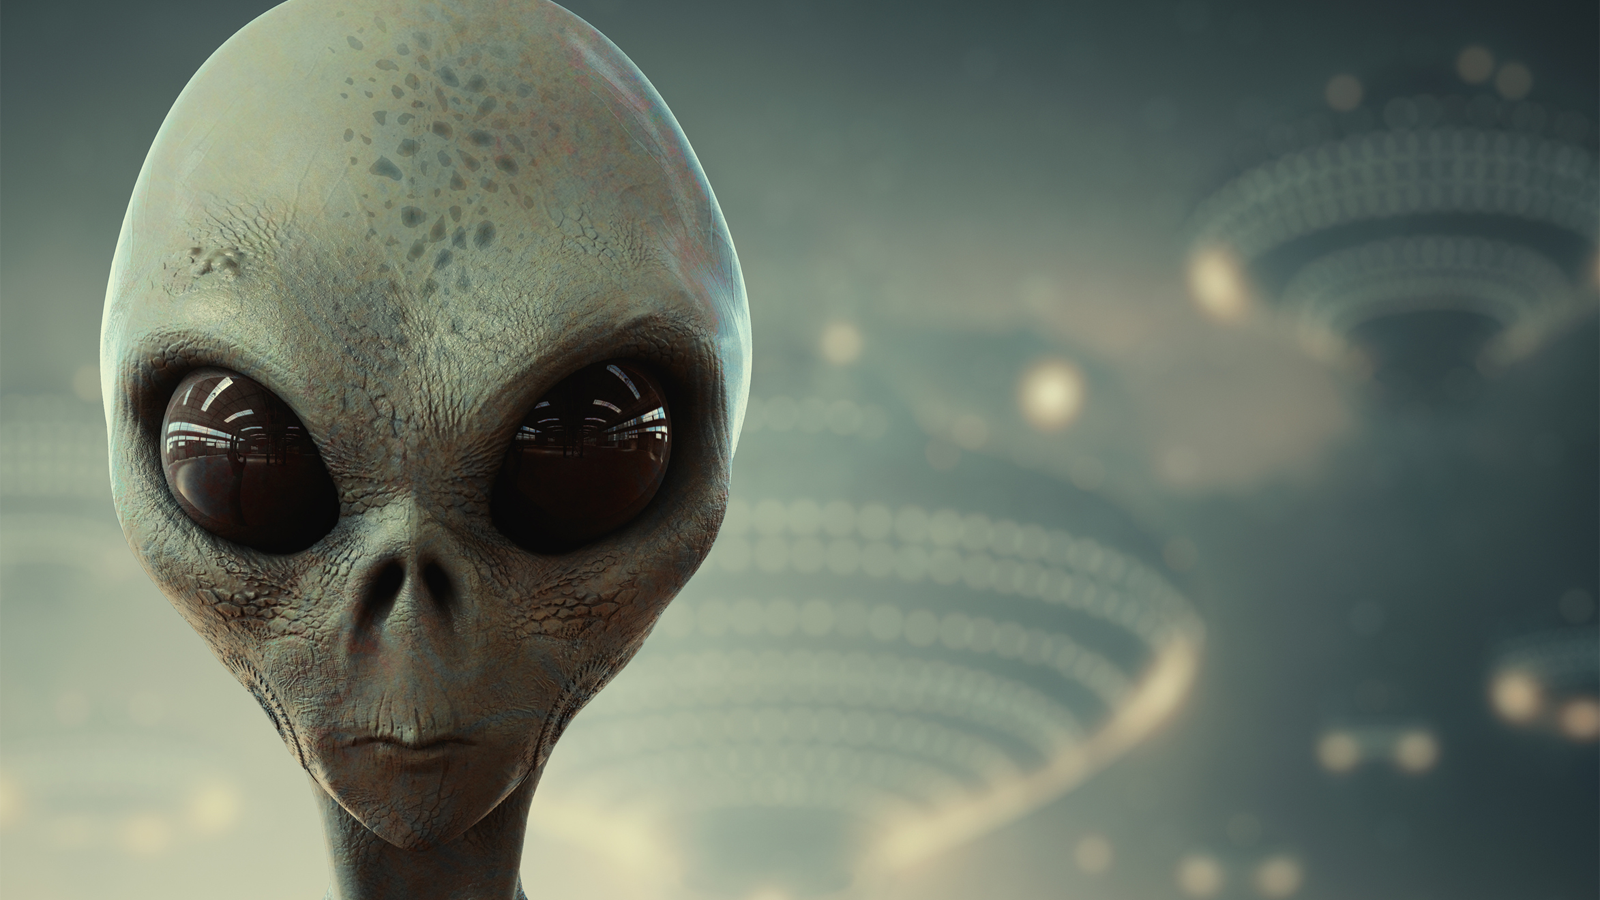 'Alien Corpses' Contain DNA That Is 'Definitely Not Human'